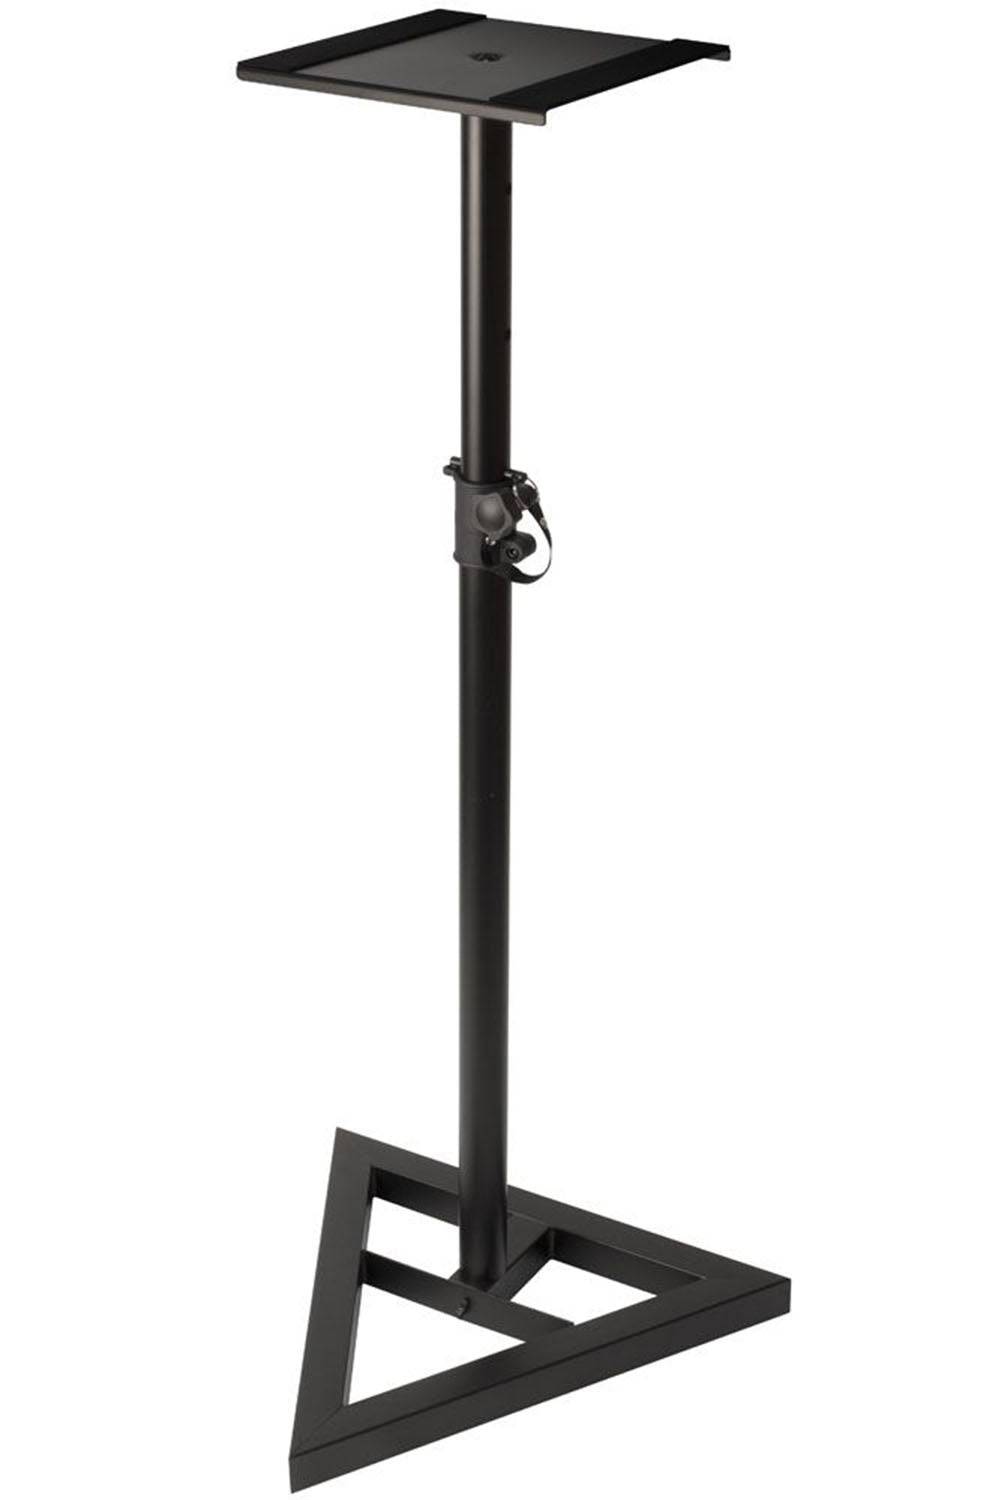 Ultimate Support JS-MS70 Studio Monitor Stands (Pair) – Black - Hollywood DJ